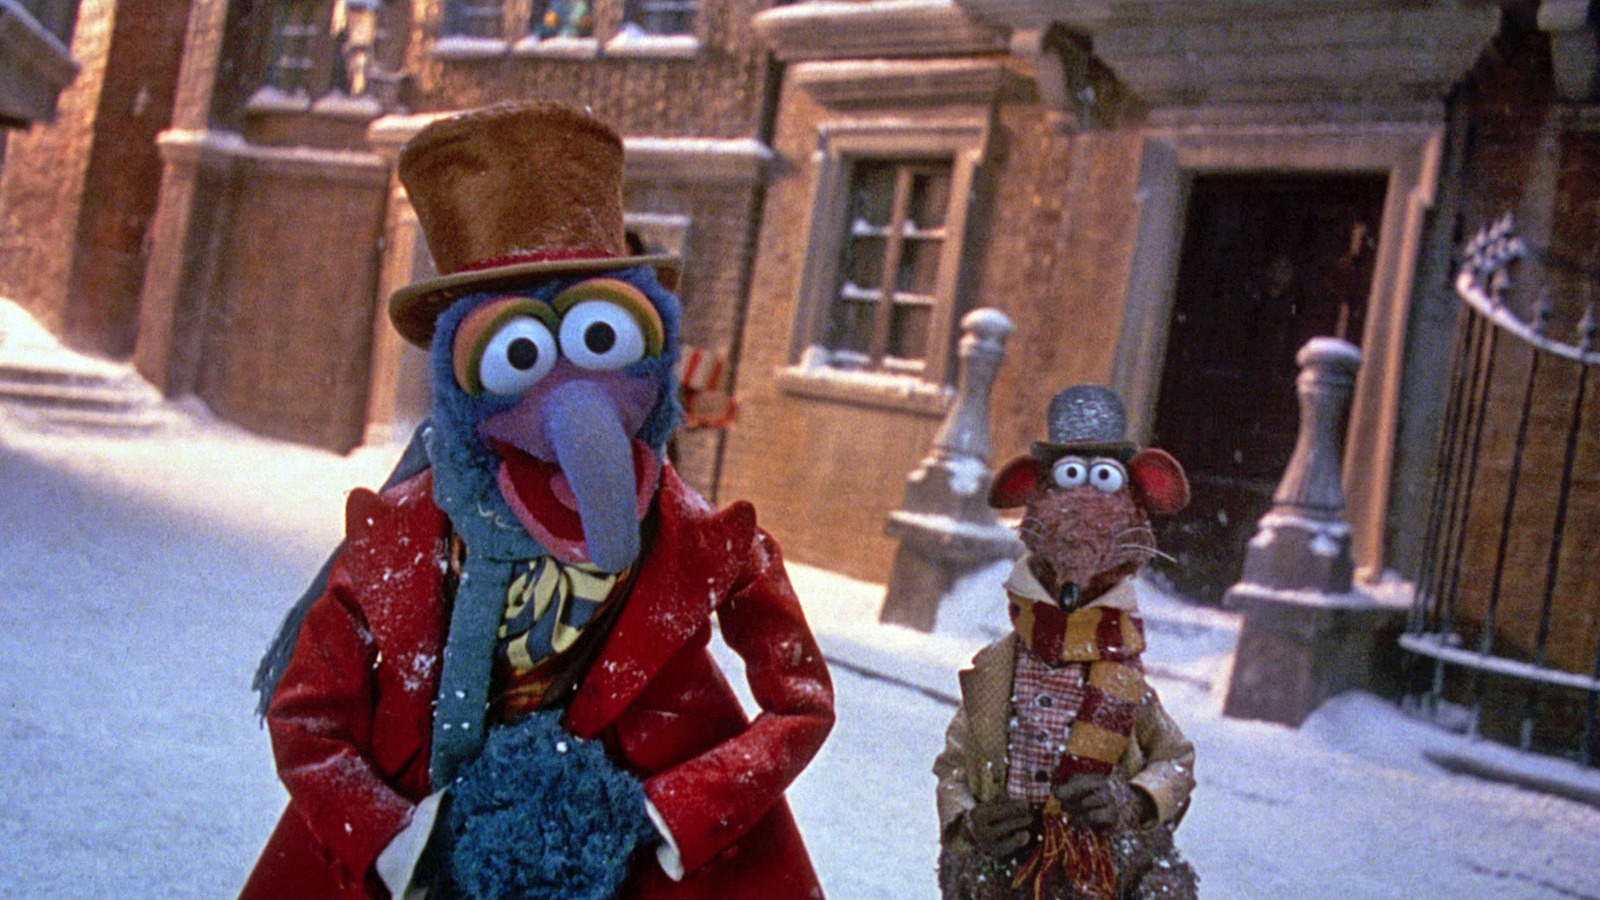 #The Muppet Christmas Carol Almost Featured A Puppet Version Of Charles Dickens